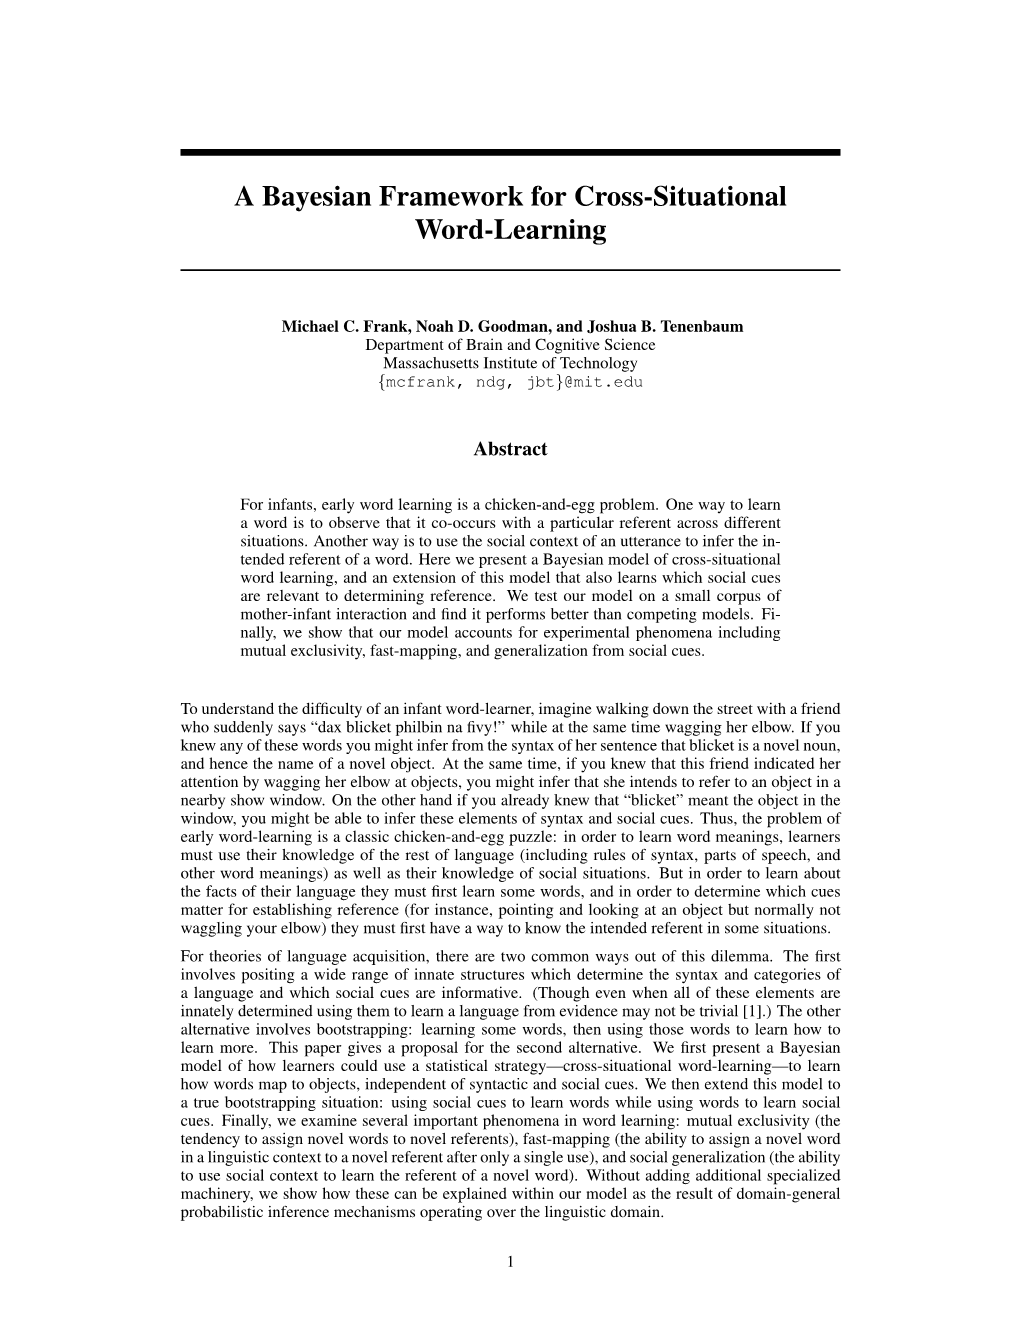 A Bayesian Framework for Cross-Situational Word-Learning